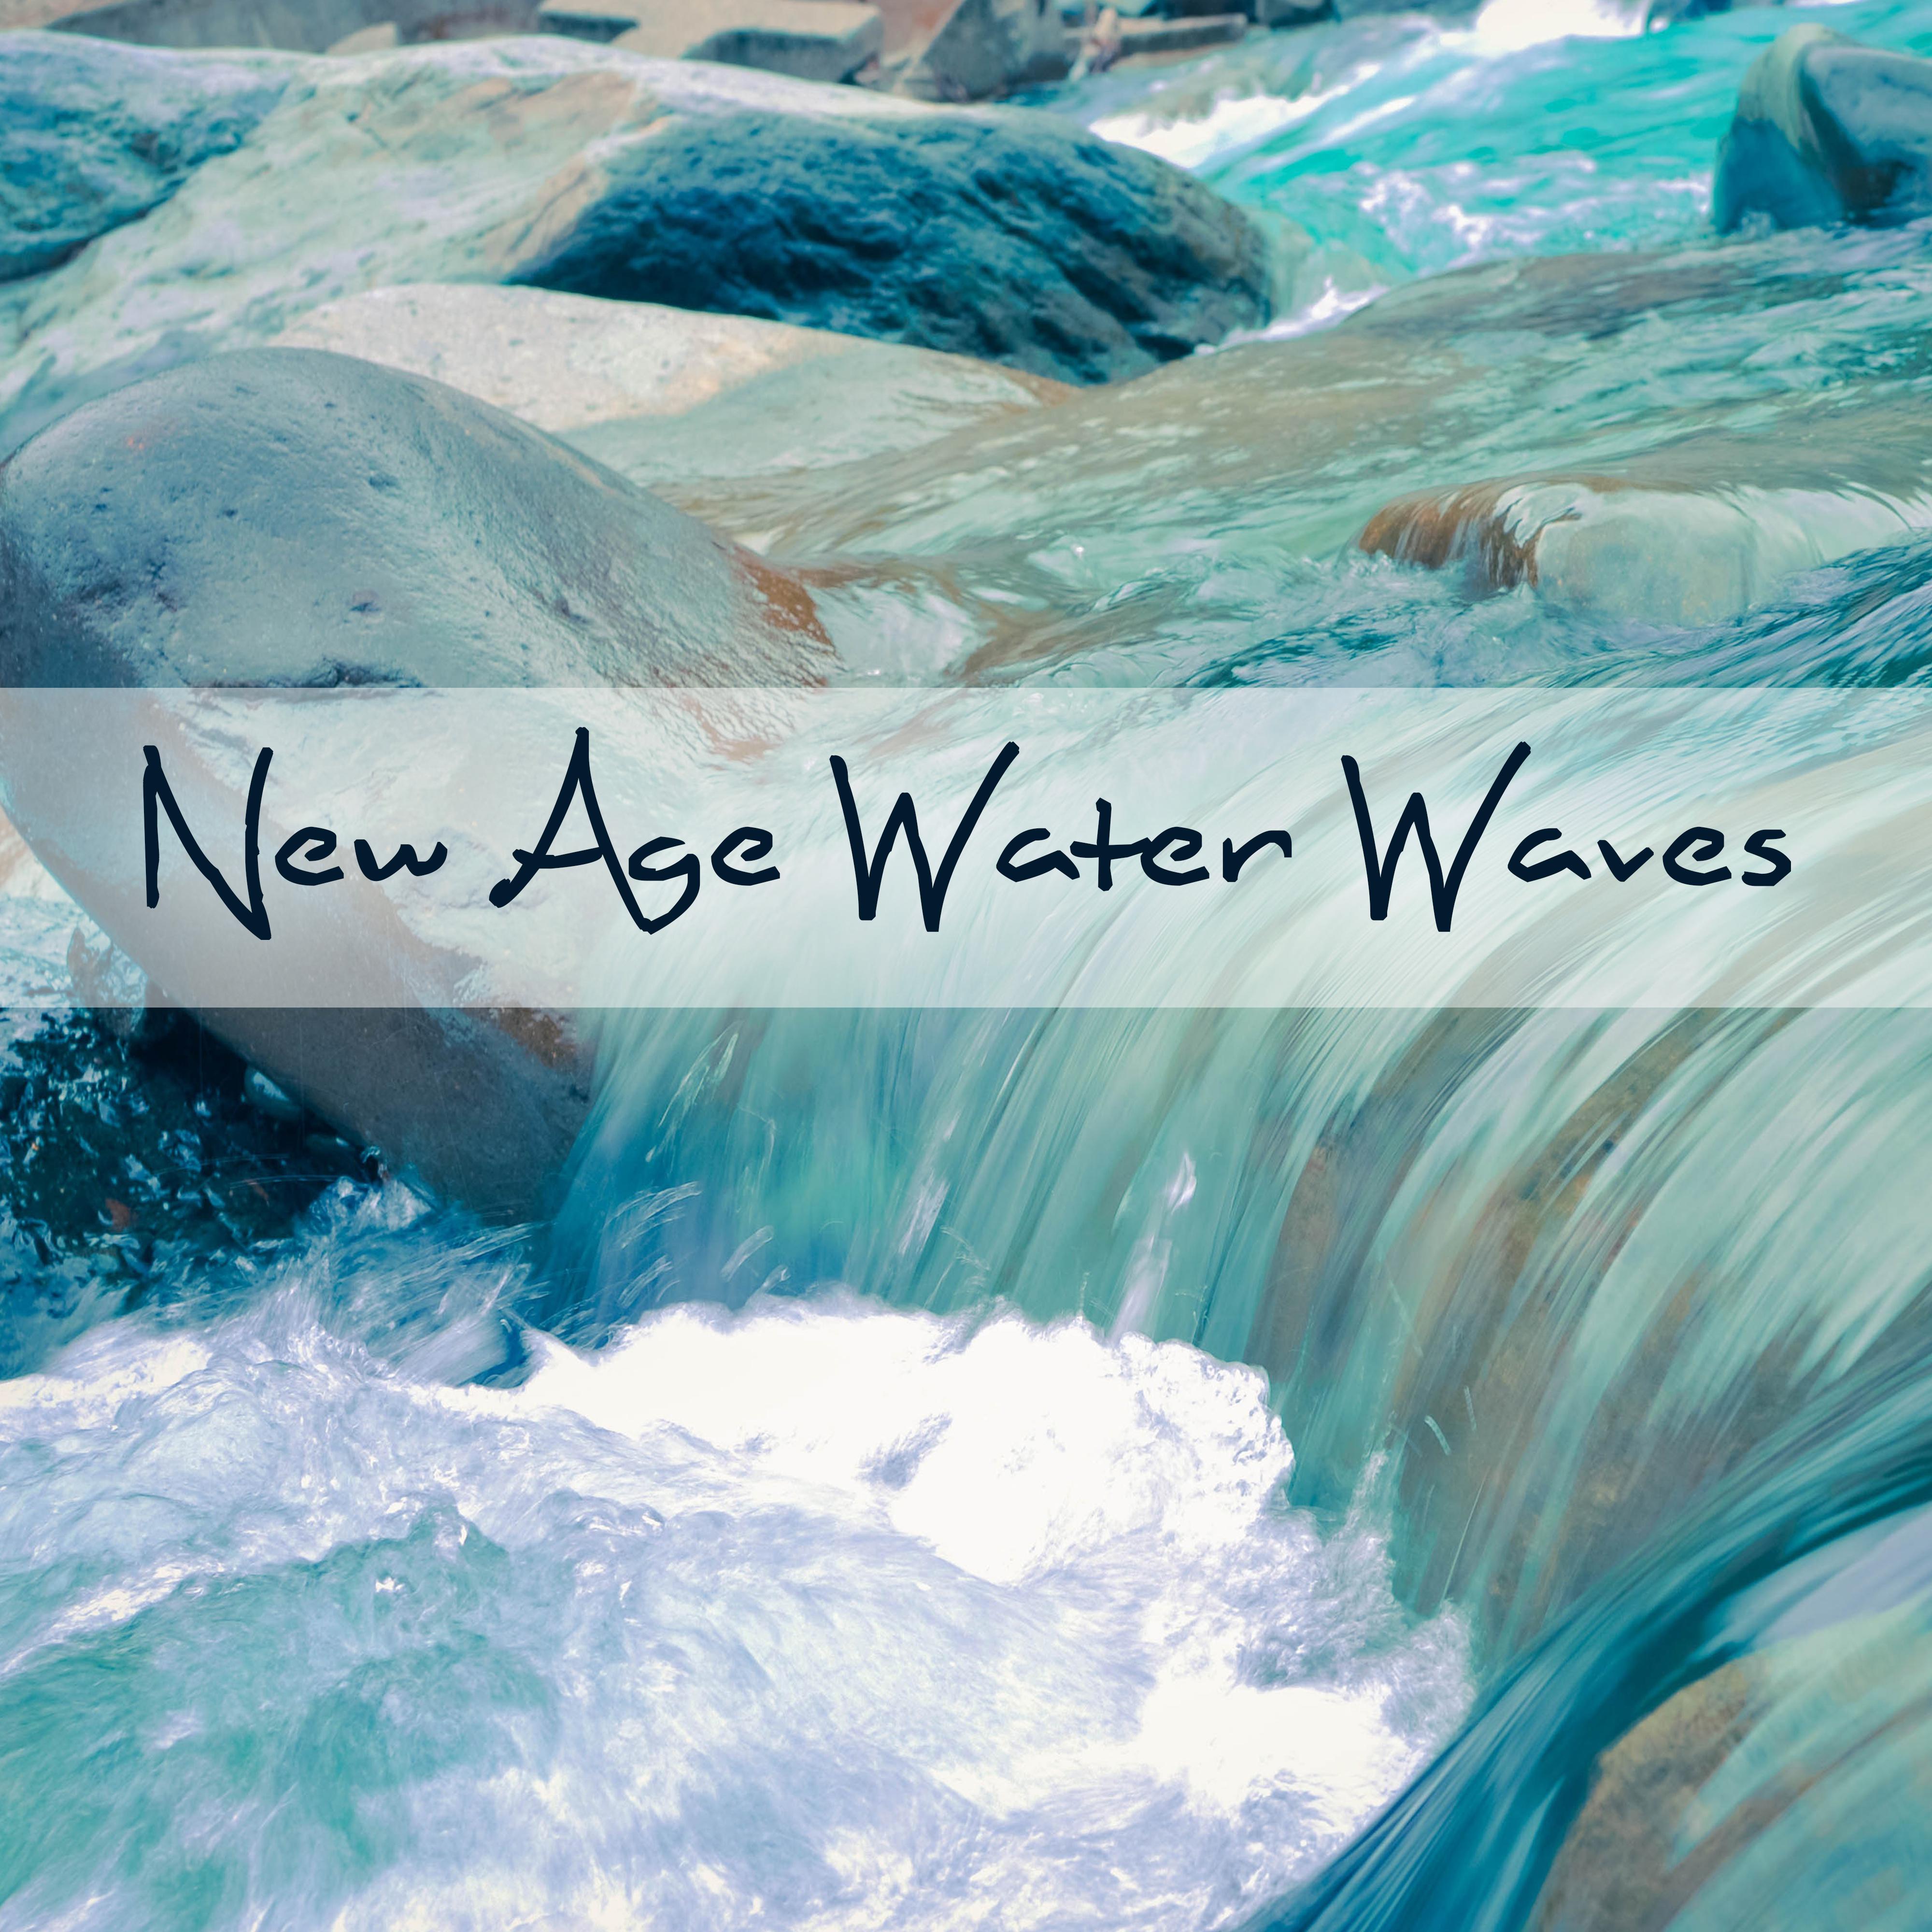 New Age Water Waves